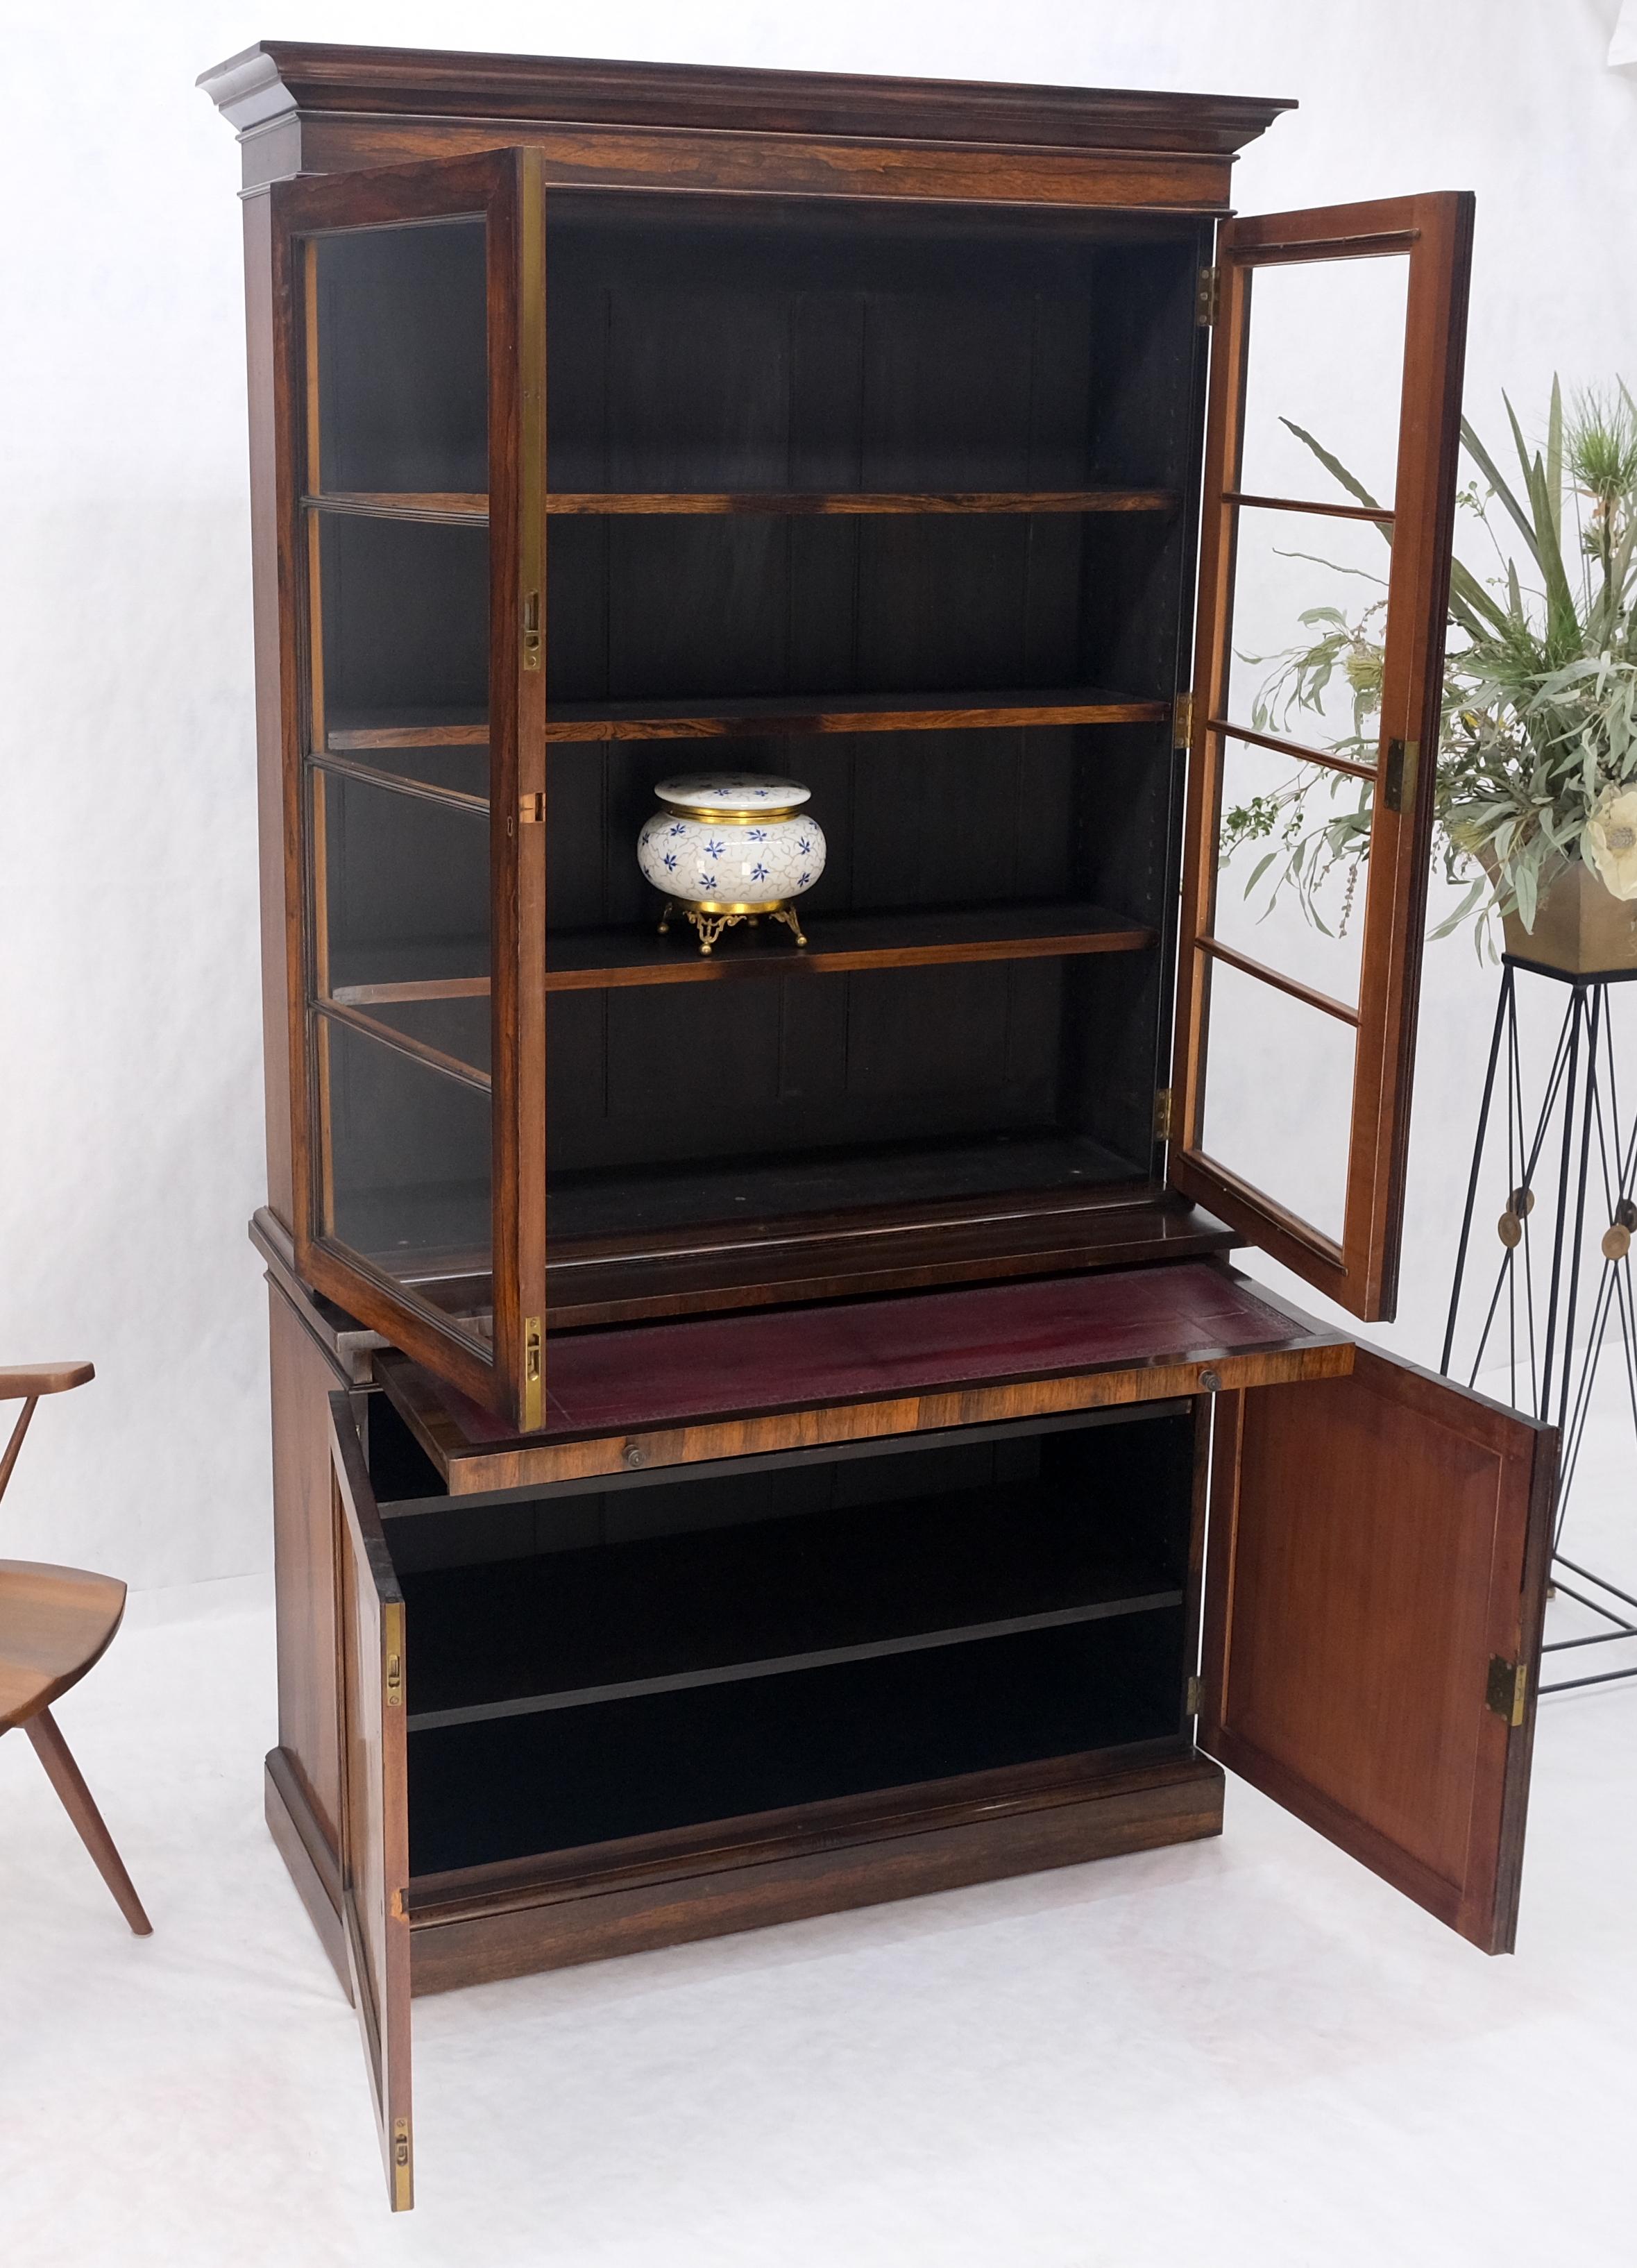 All Rosewood Double Glass Doors Adjustable Shelves Pull Out Desk Secretary MINT! For Sale 2